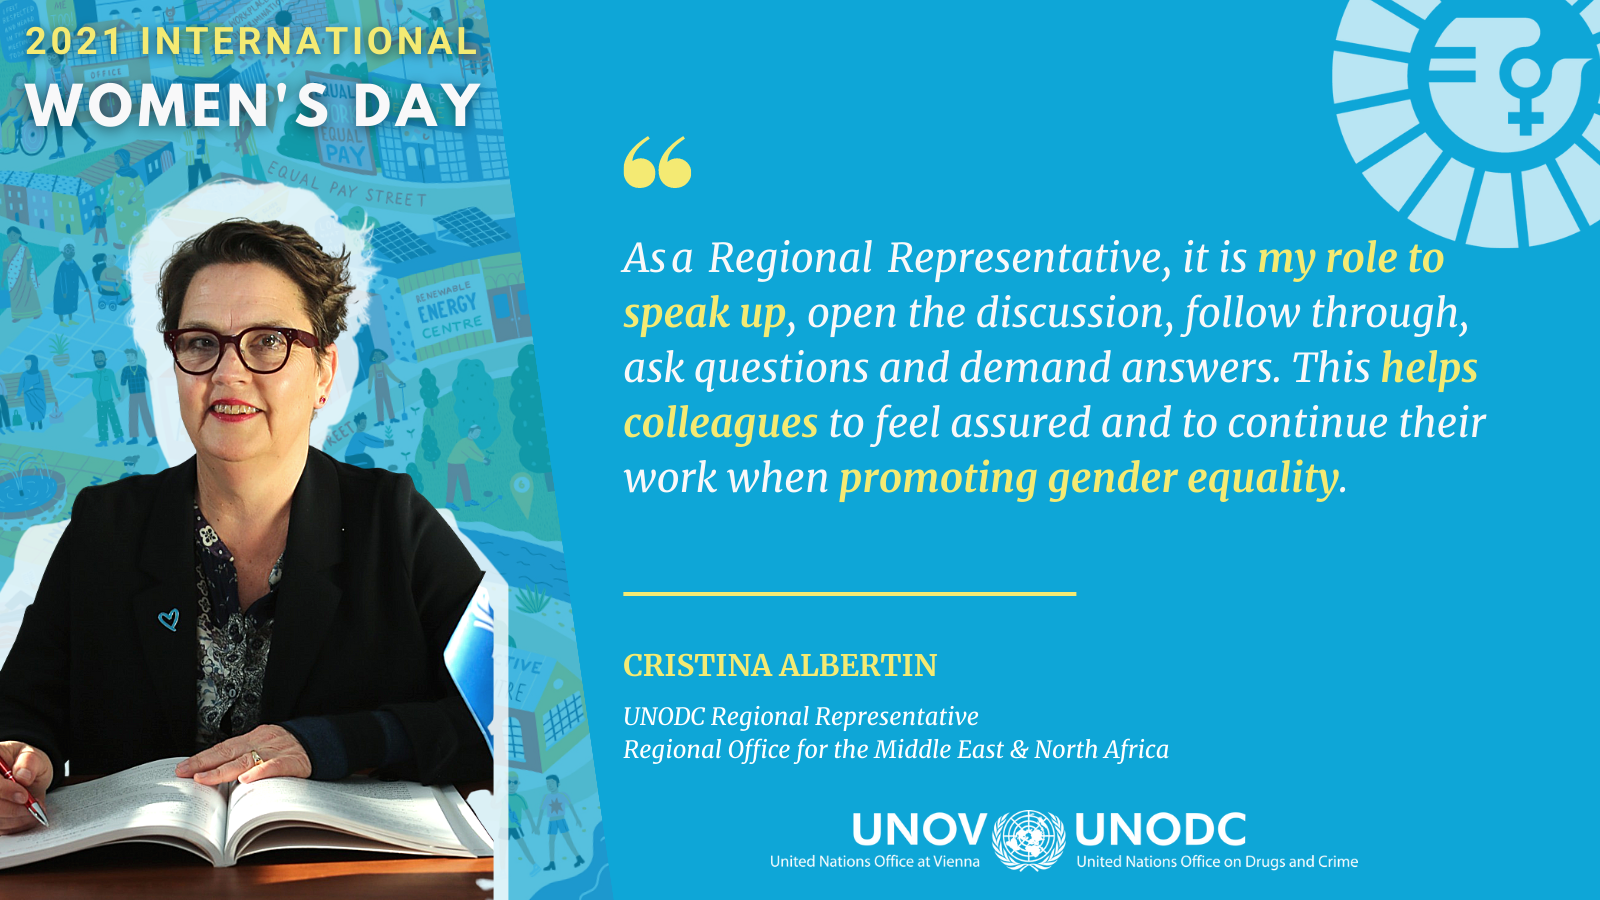 Quote of Cristina Albertin "As a Regional Representative" it is my role to speak up, open the discussion, follow through, ask questions and demand answers. This helps colleagues to feel assured and to continue their work when promoting gender equality 